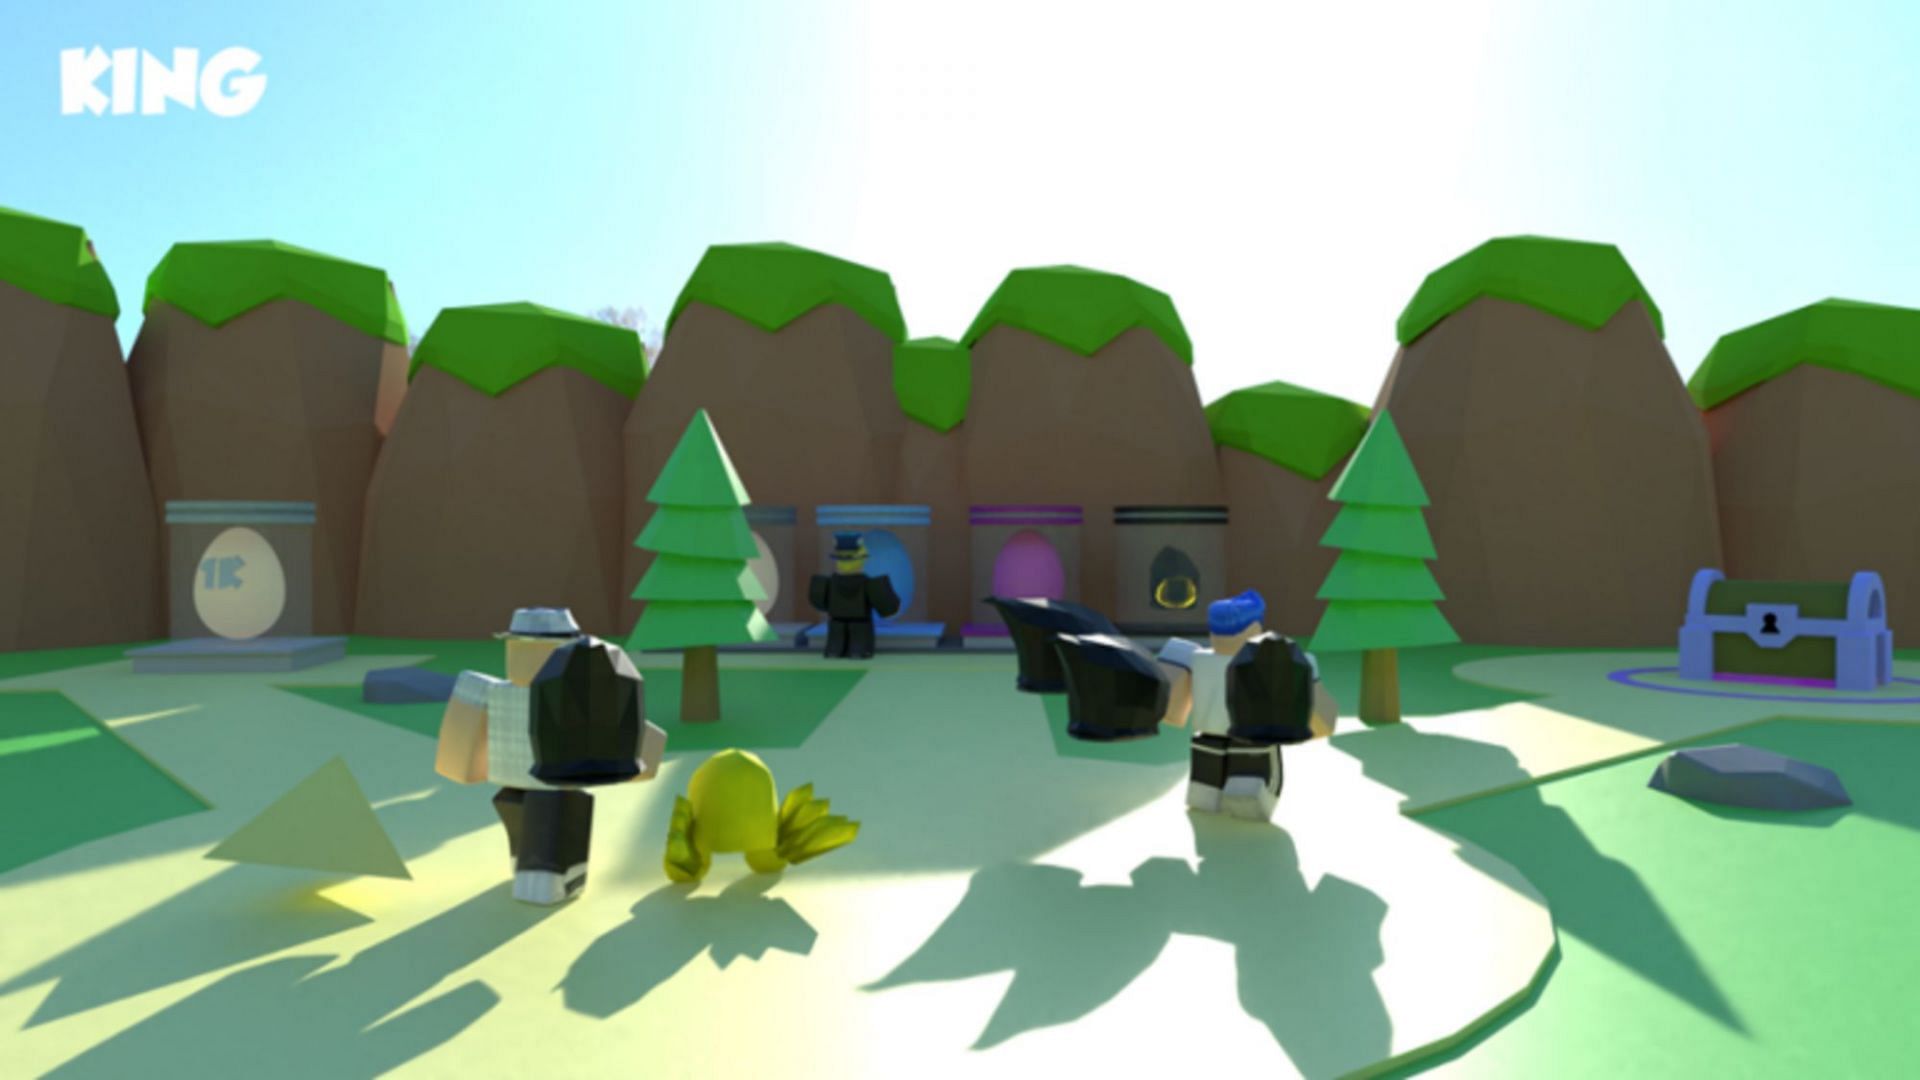 The clicking game (Image via Roblox)